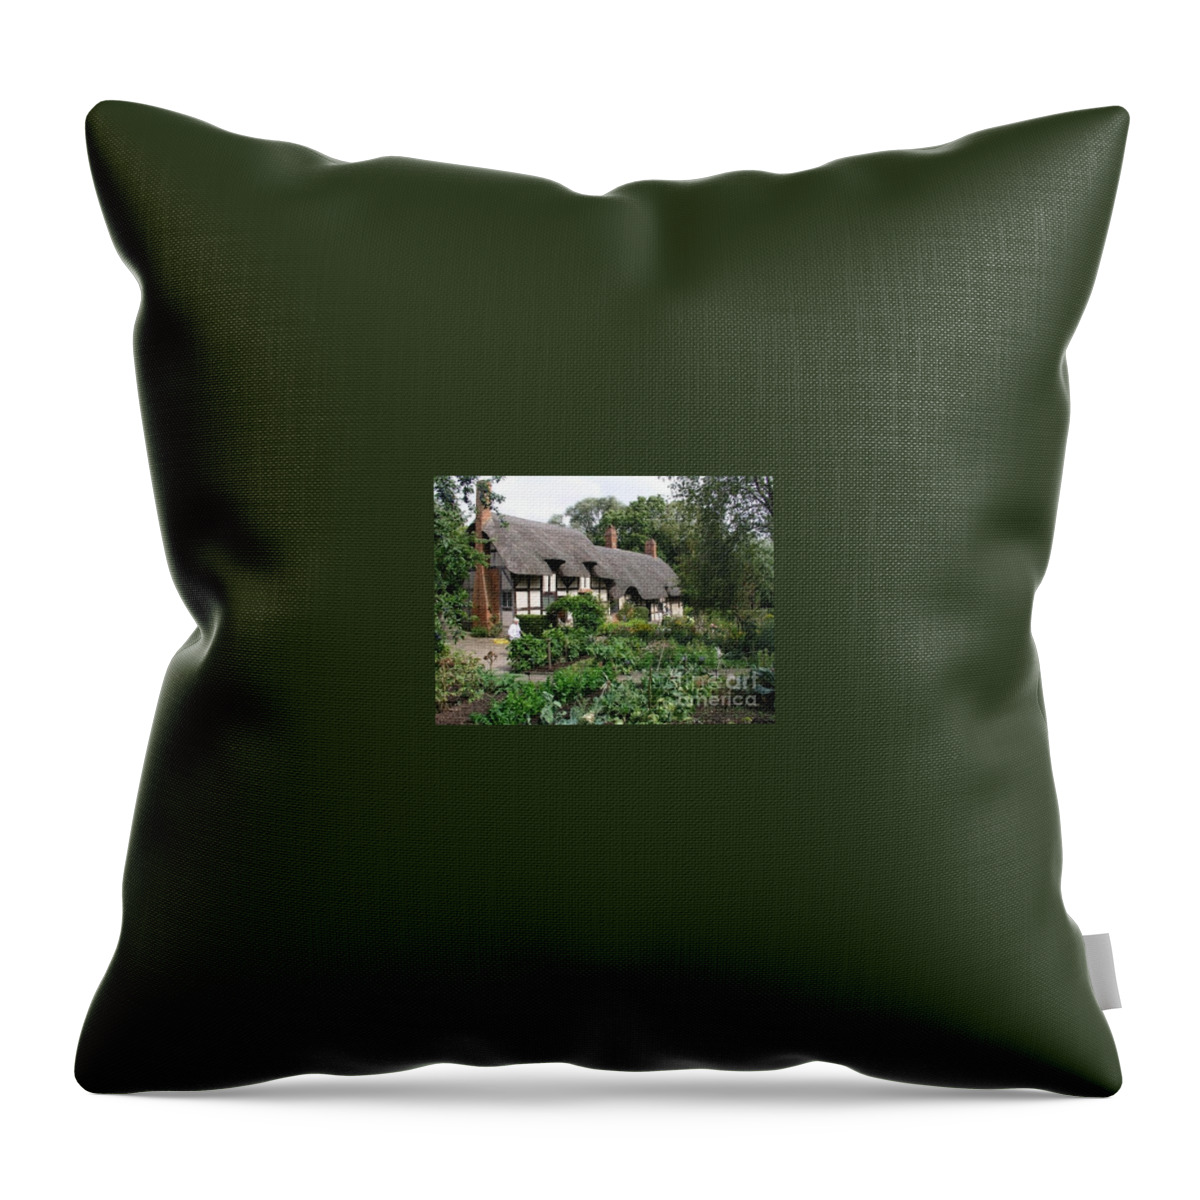 Anne Hathaway's Cottage Throw Pillow featuring the photograph Anne Hathaway's Cottage by Bev Conover